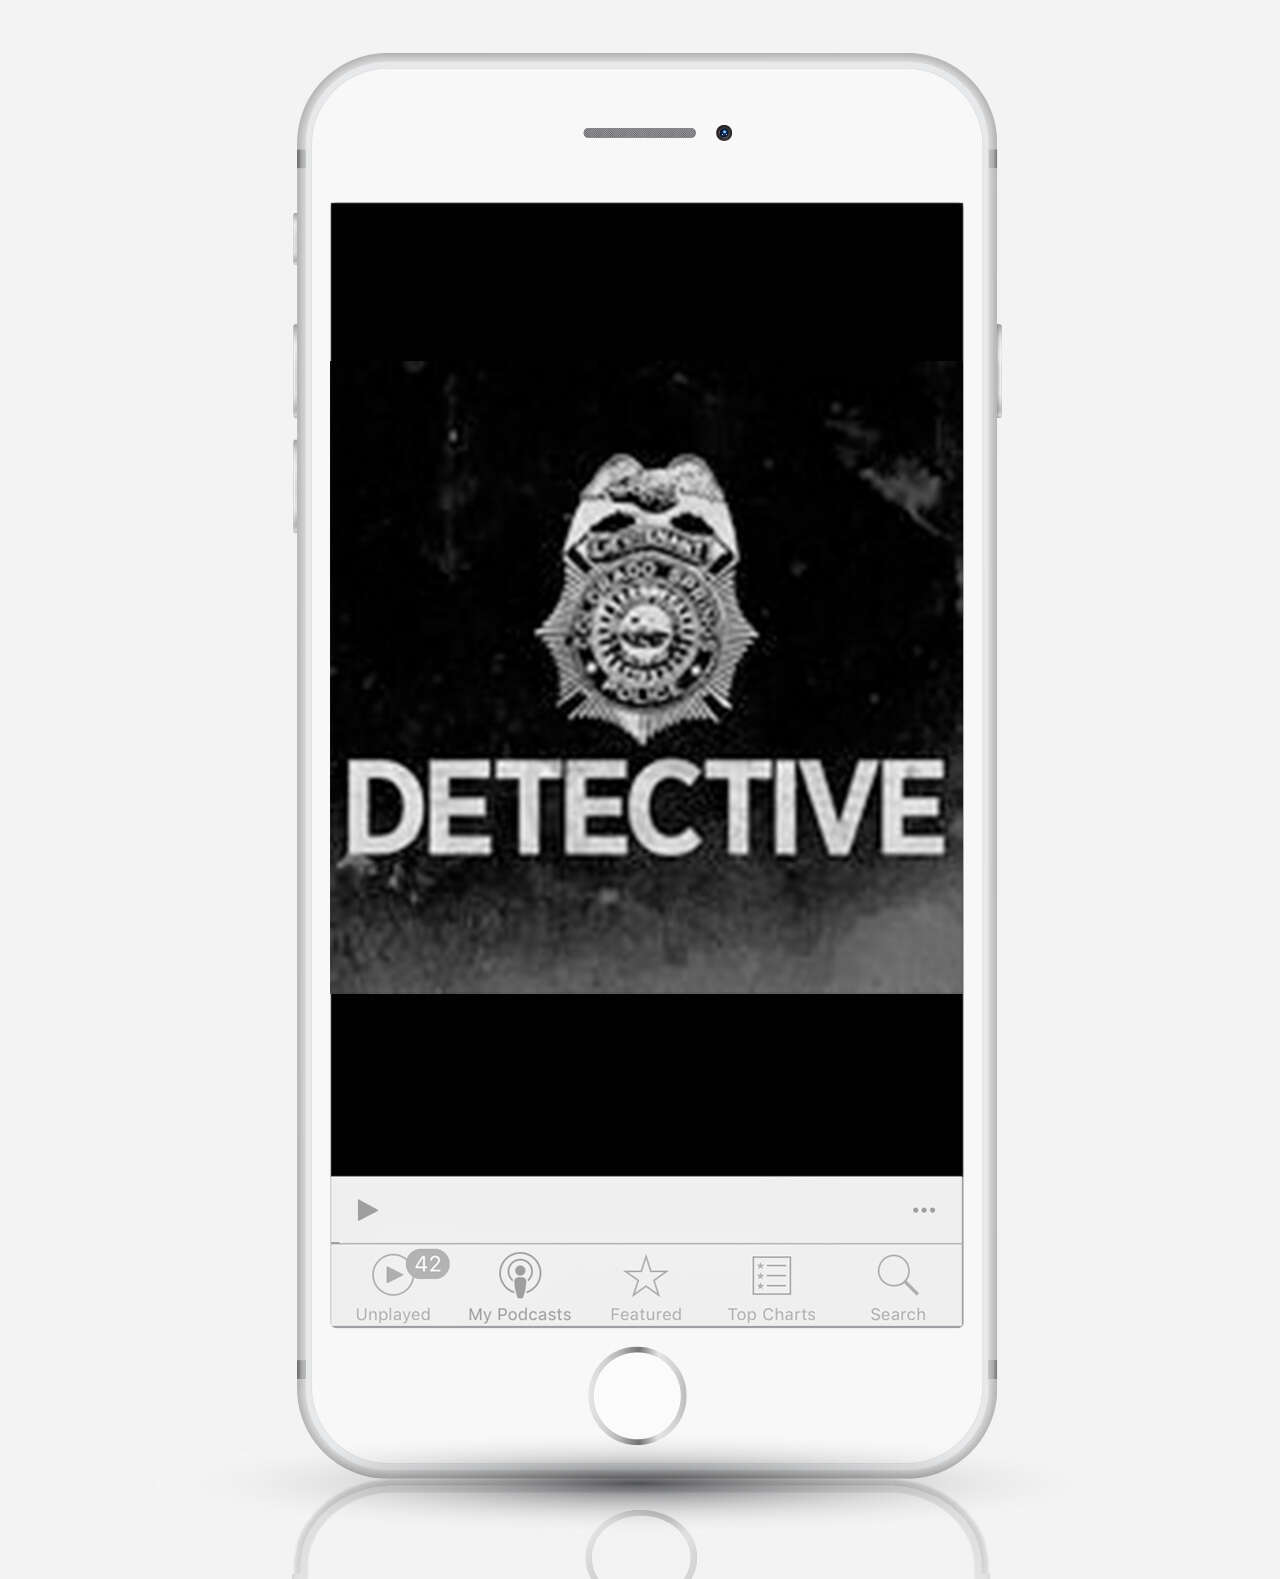 Investigation Discovery Detective podcast